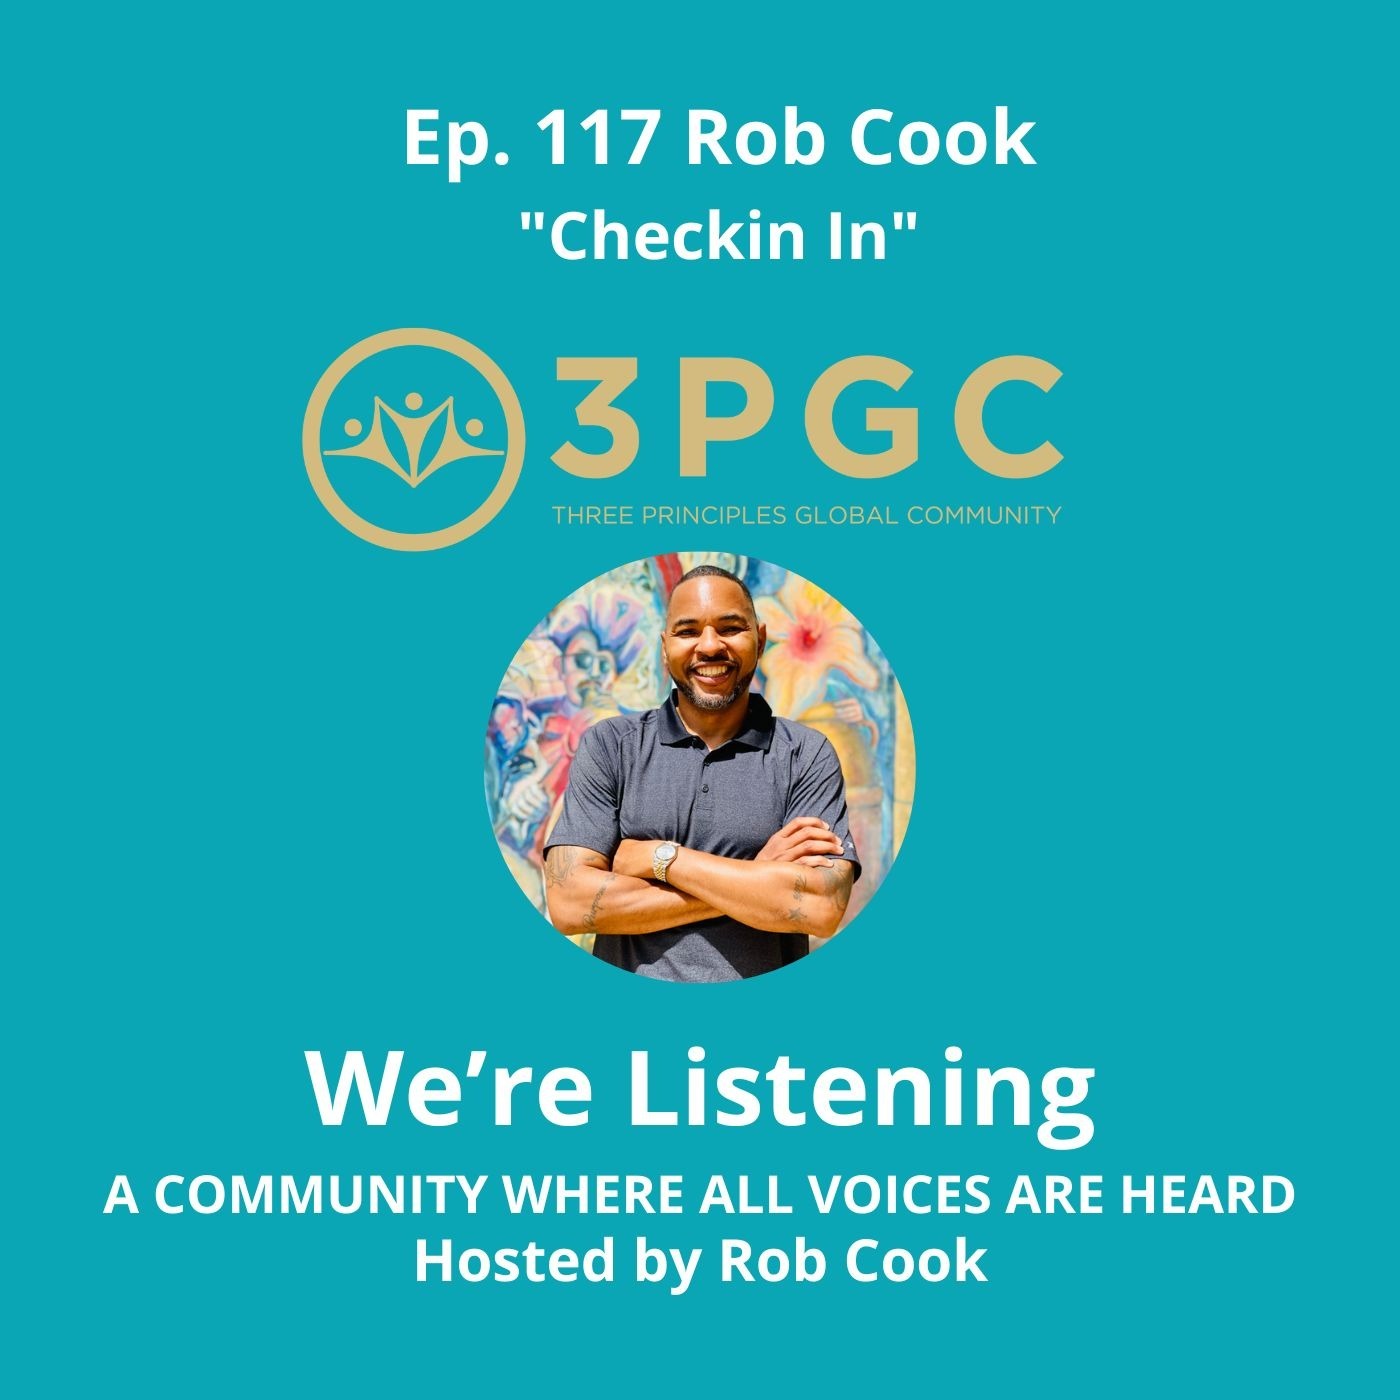 Ep. 117 Rob Cook “Checking In”